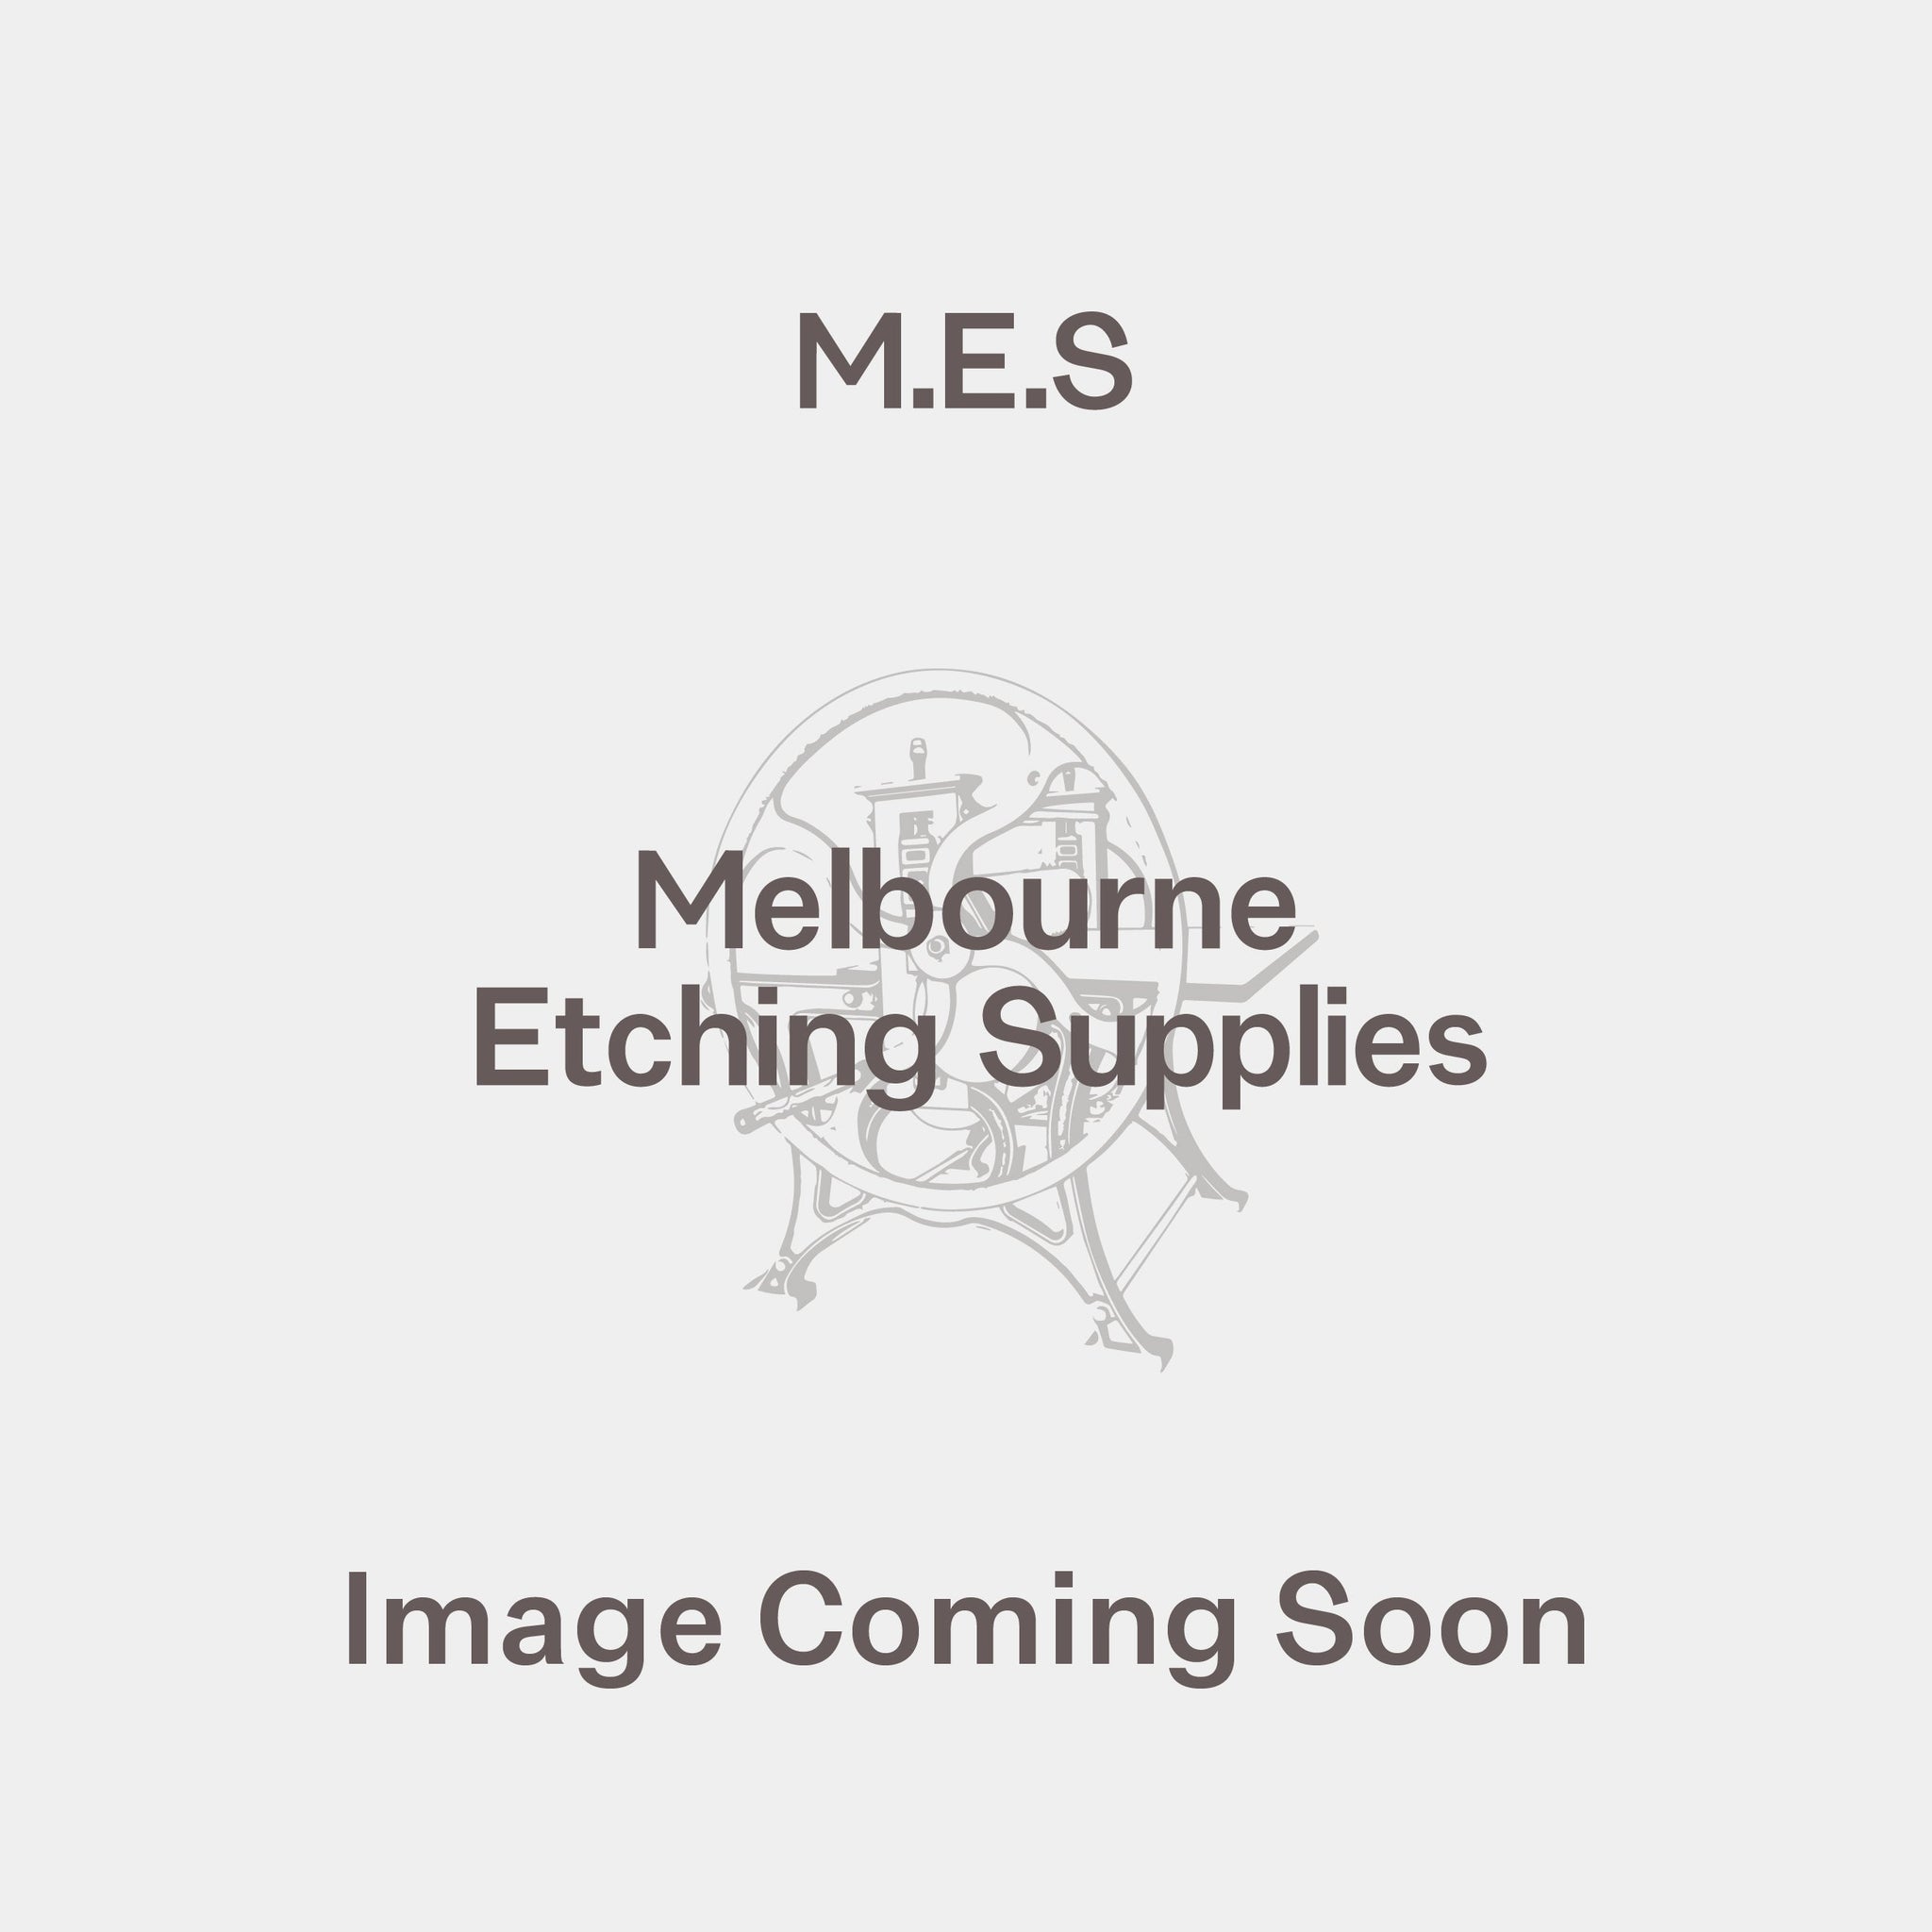 Grifold Swivel Blades #113 - Melbourne Etching Supplies